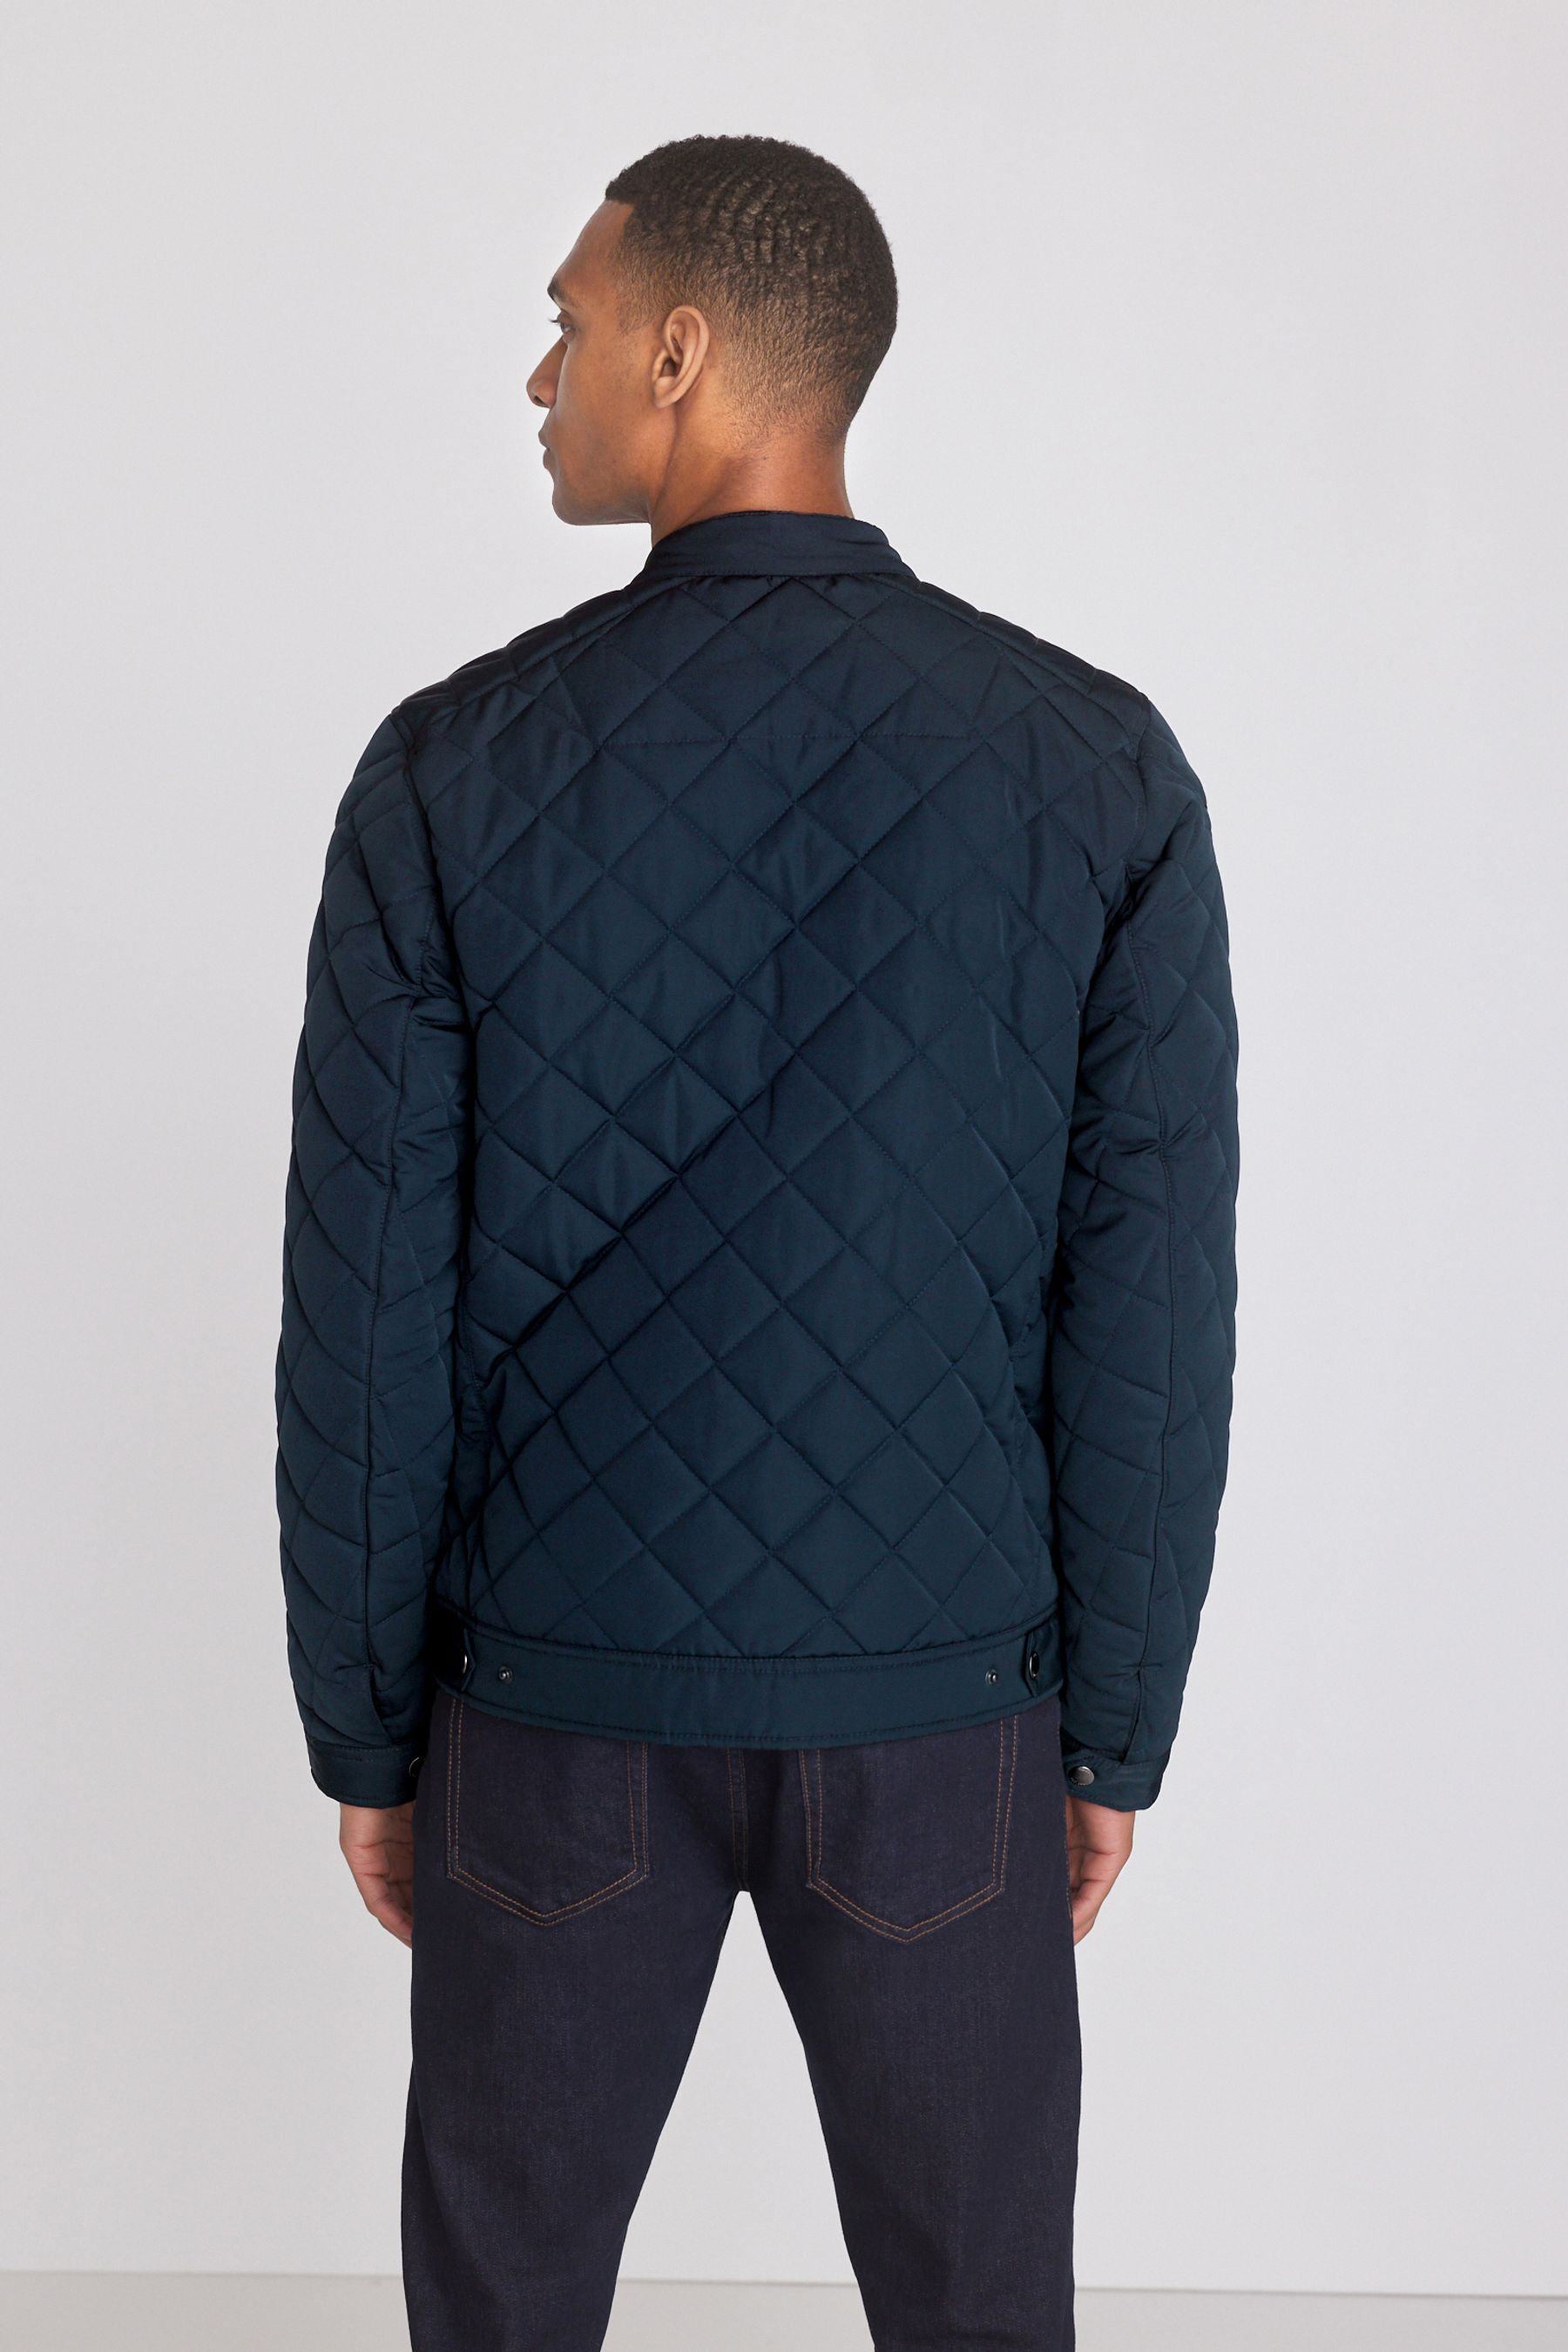 Buy Navy Blue Shower Resistant Diamond Quilt Racer Neck Jacket from the ...